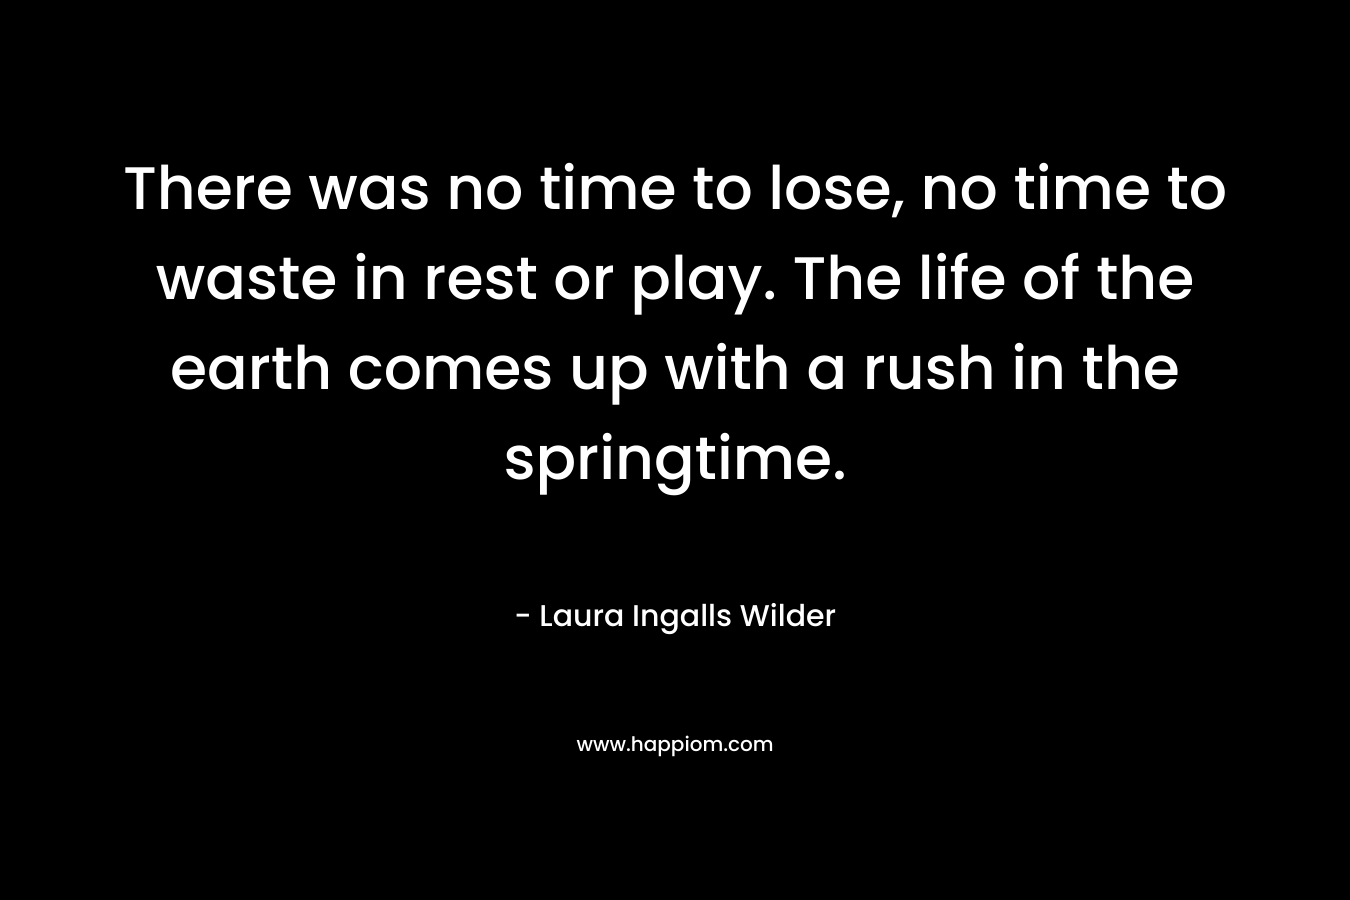 There was no time to lose, no time to waste in rest or play. The life of the earth comes up with a rush in the springtime.